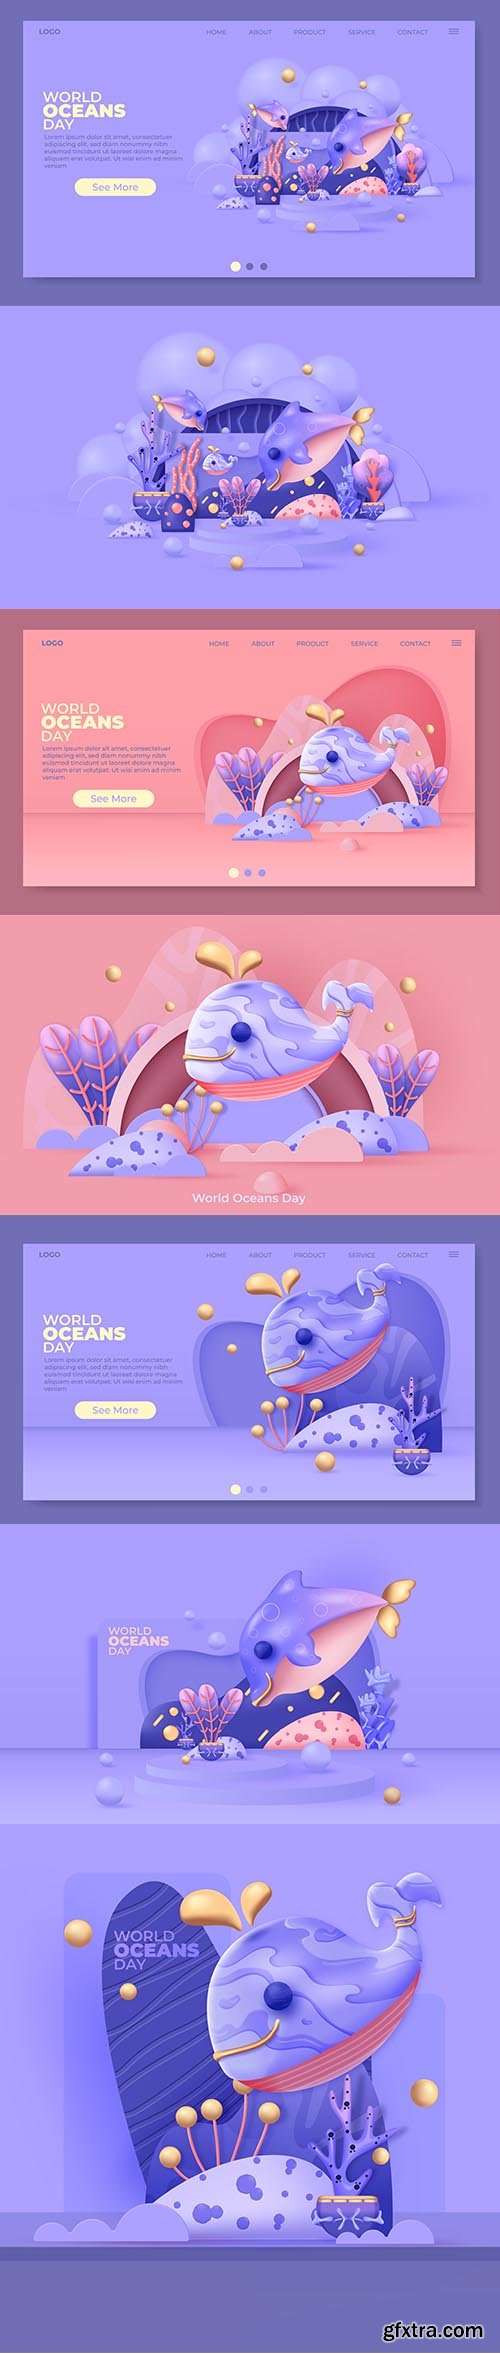 World oceans day illustration for landing page